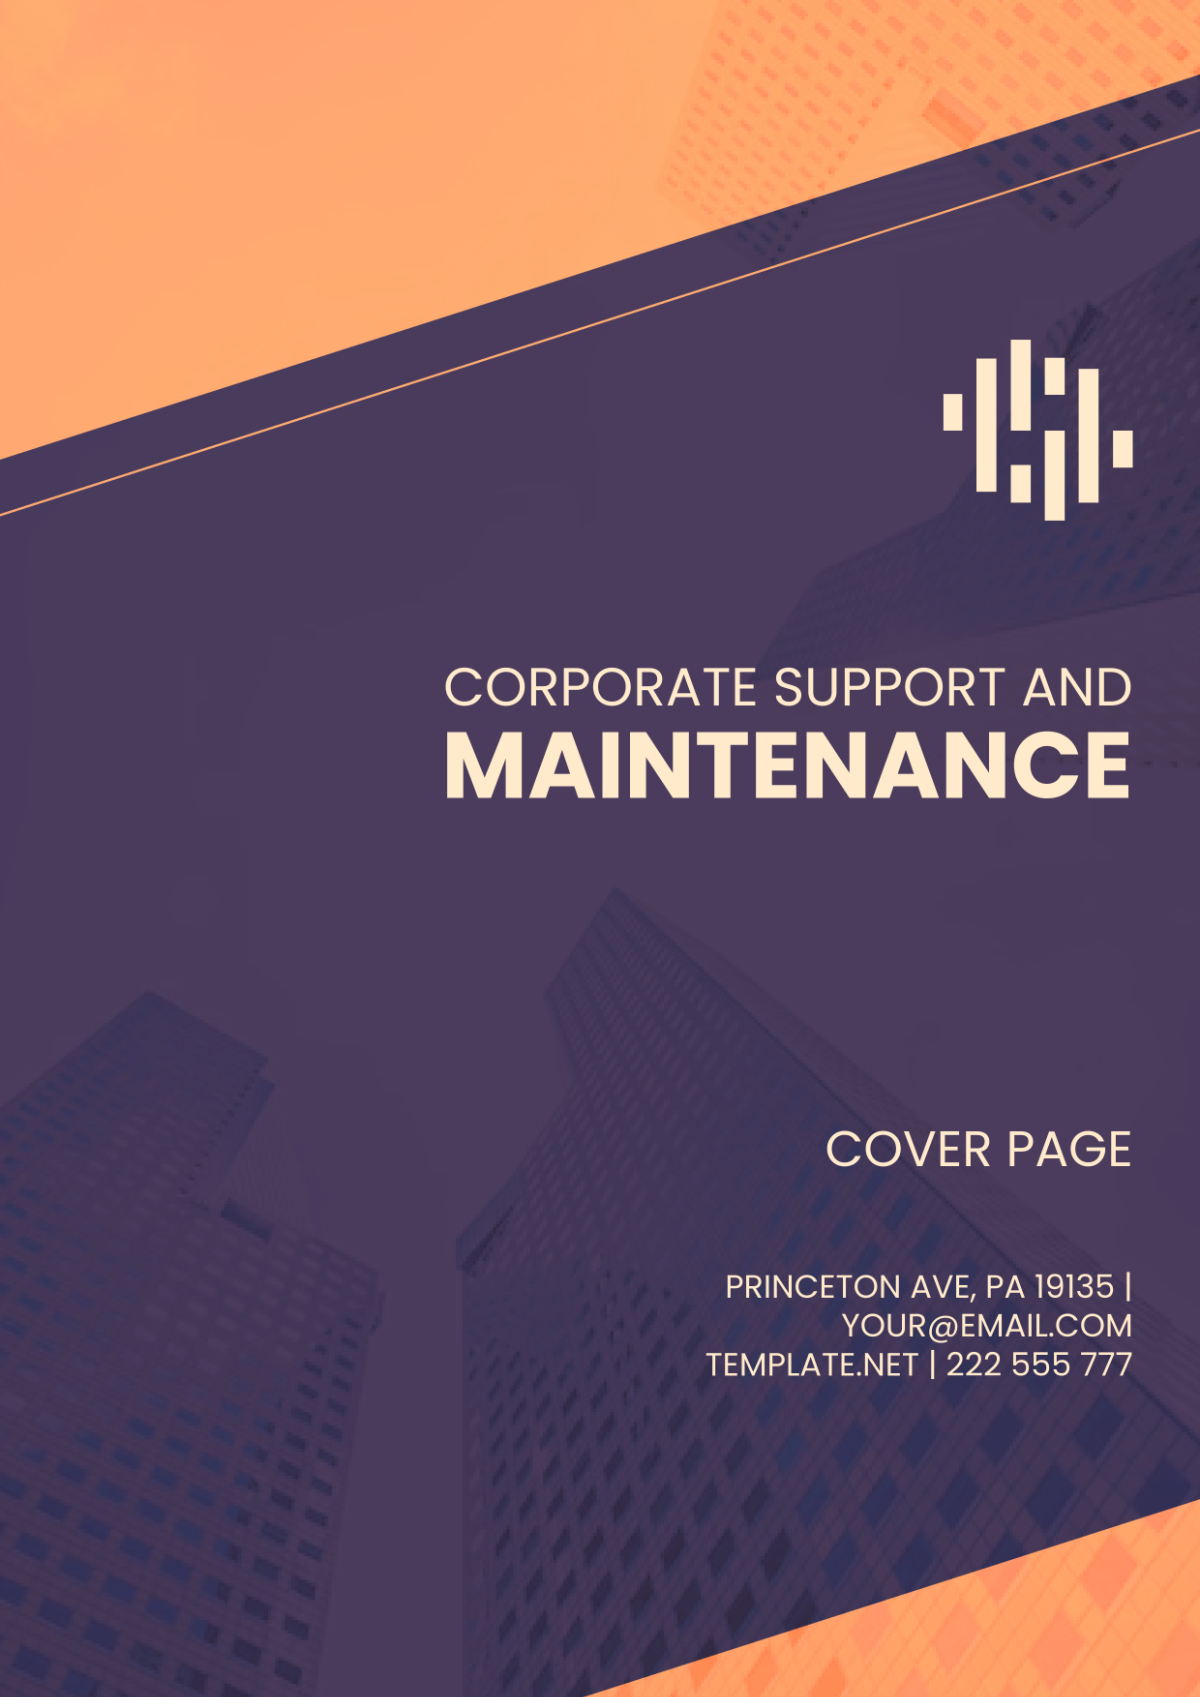 Corporate Support and Maintenance Cover Page Template